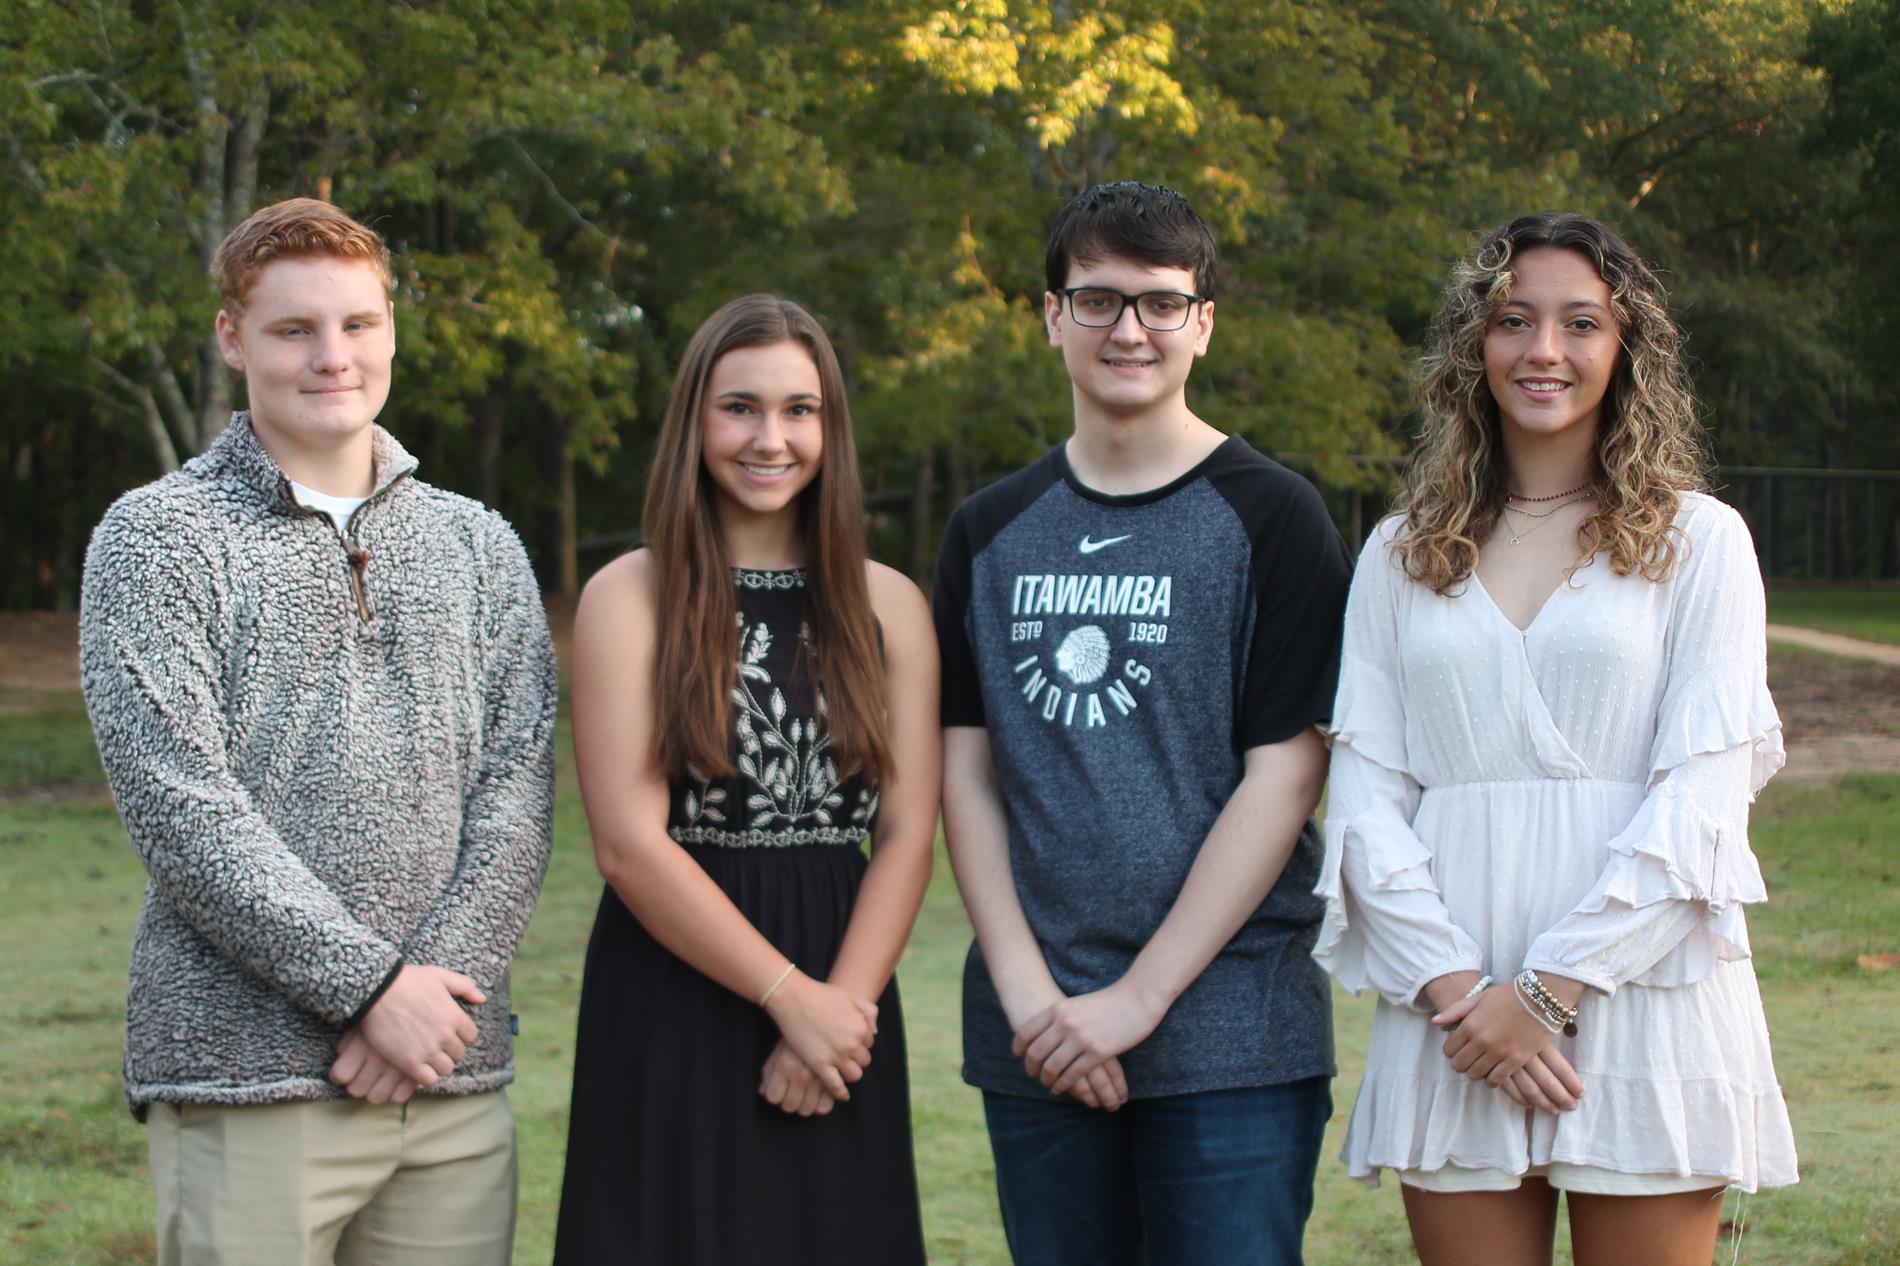 Student Council Officers